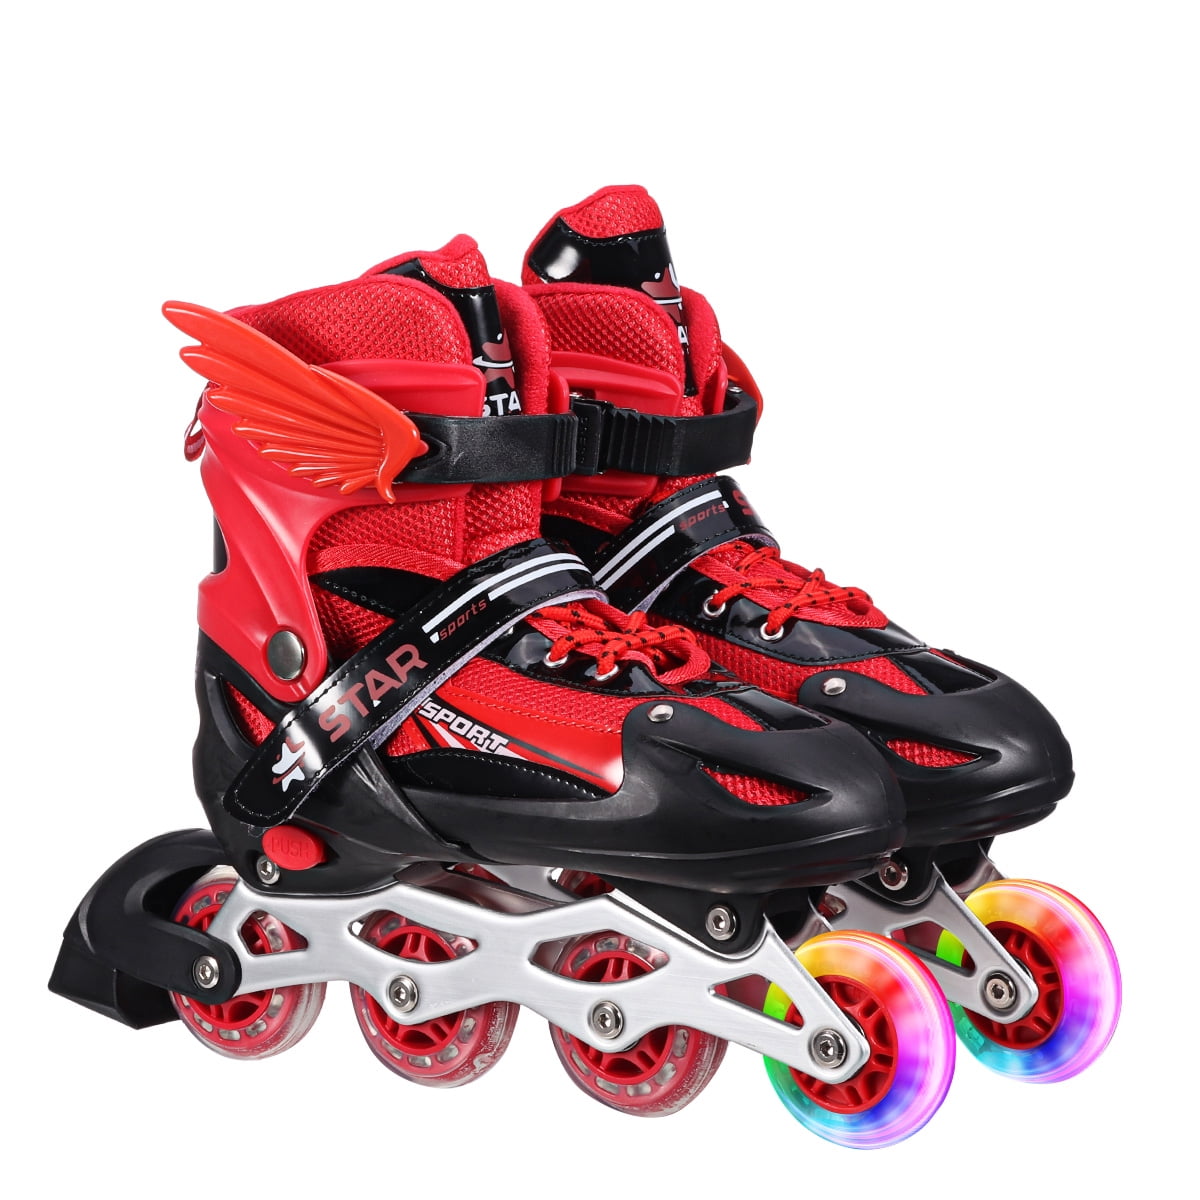 7 Colors Changing Upgraded LED Strips Roller Skate Shoes with Double Wheels Inline Automatic Retractable Technical Skateboarding Sport Cross Trainers Vibration Can Charge Flashing Gymnastic Sneakers 